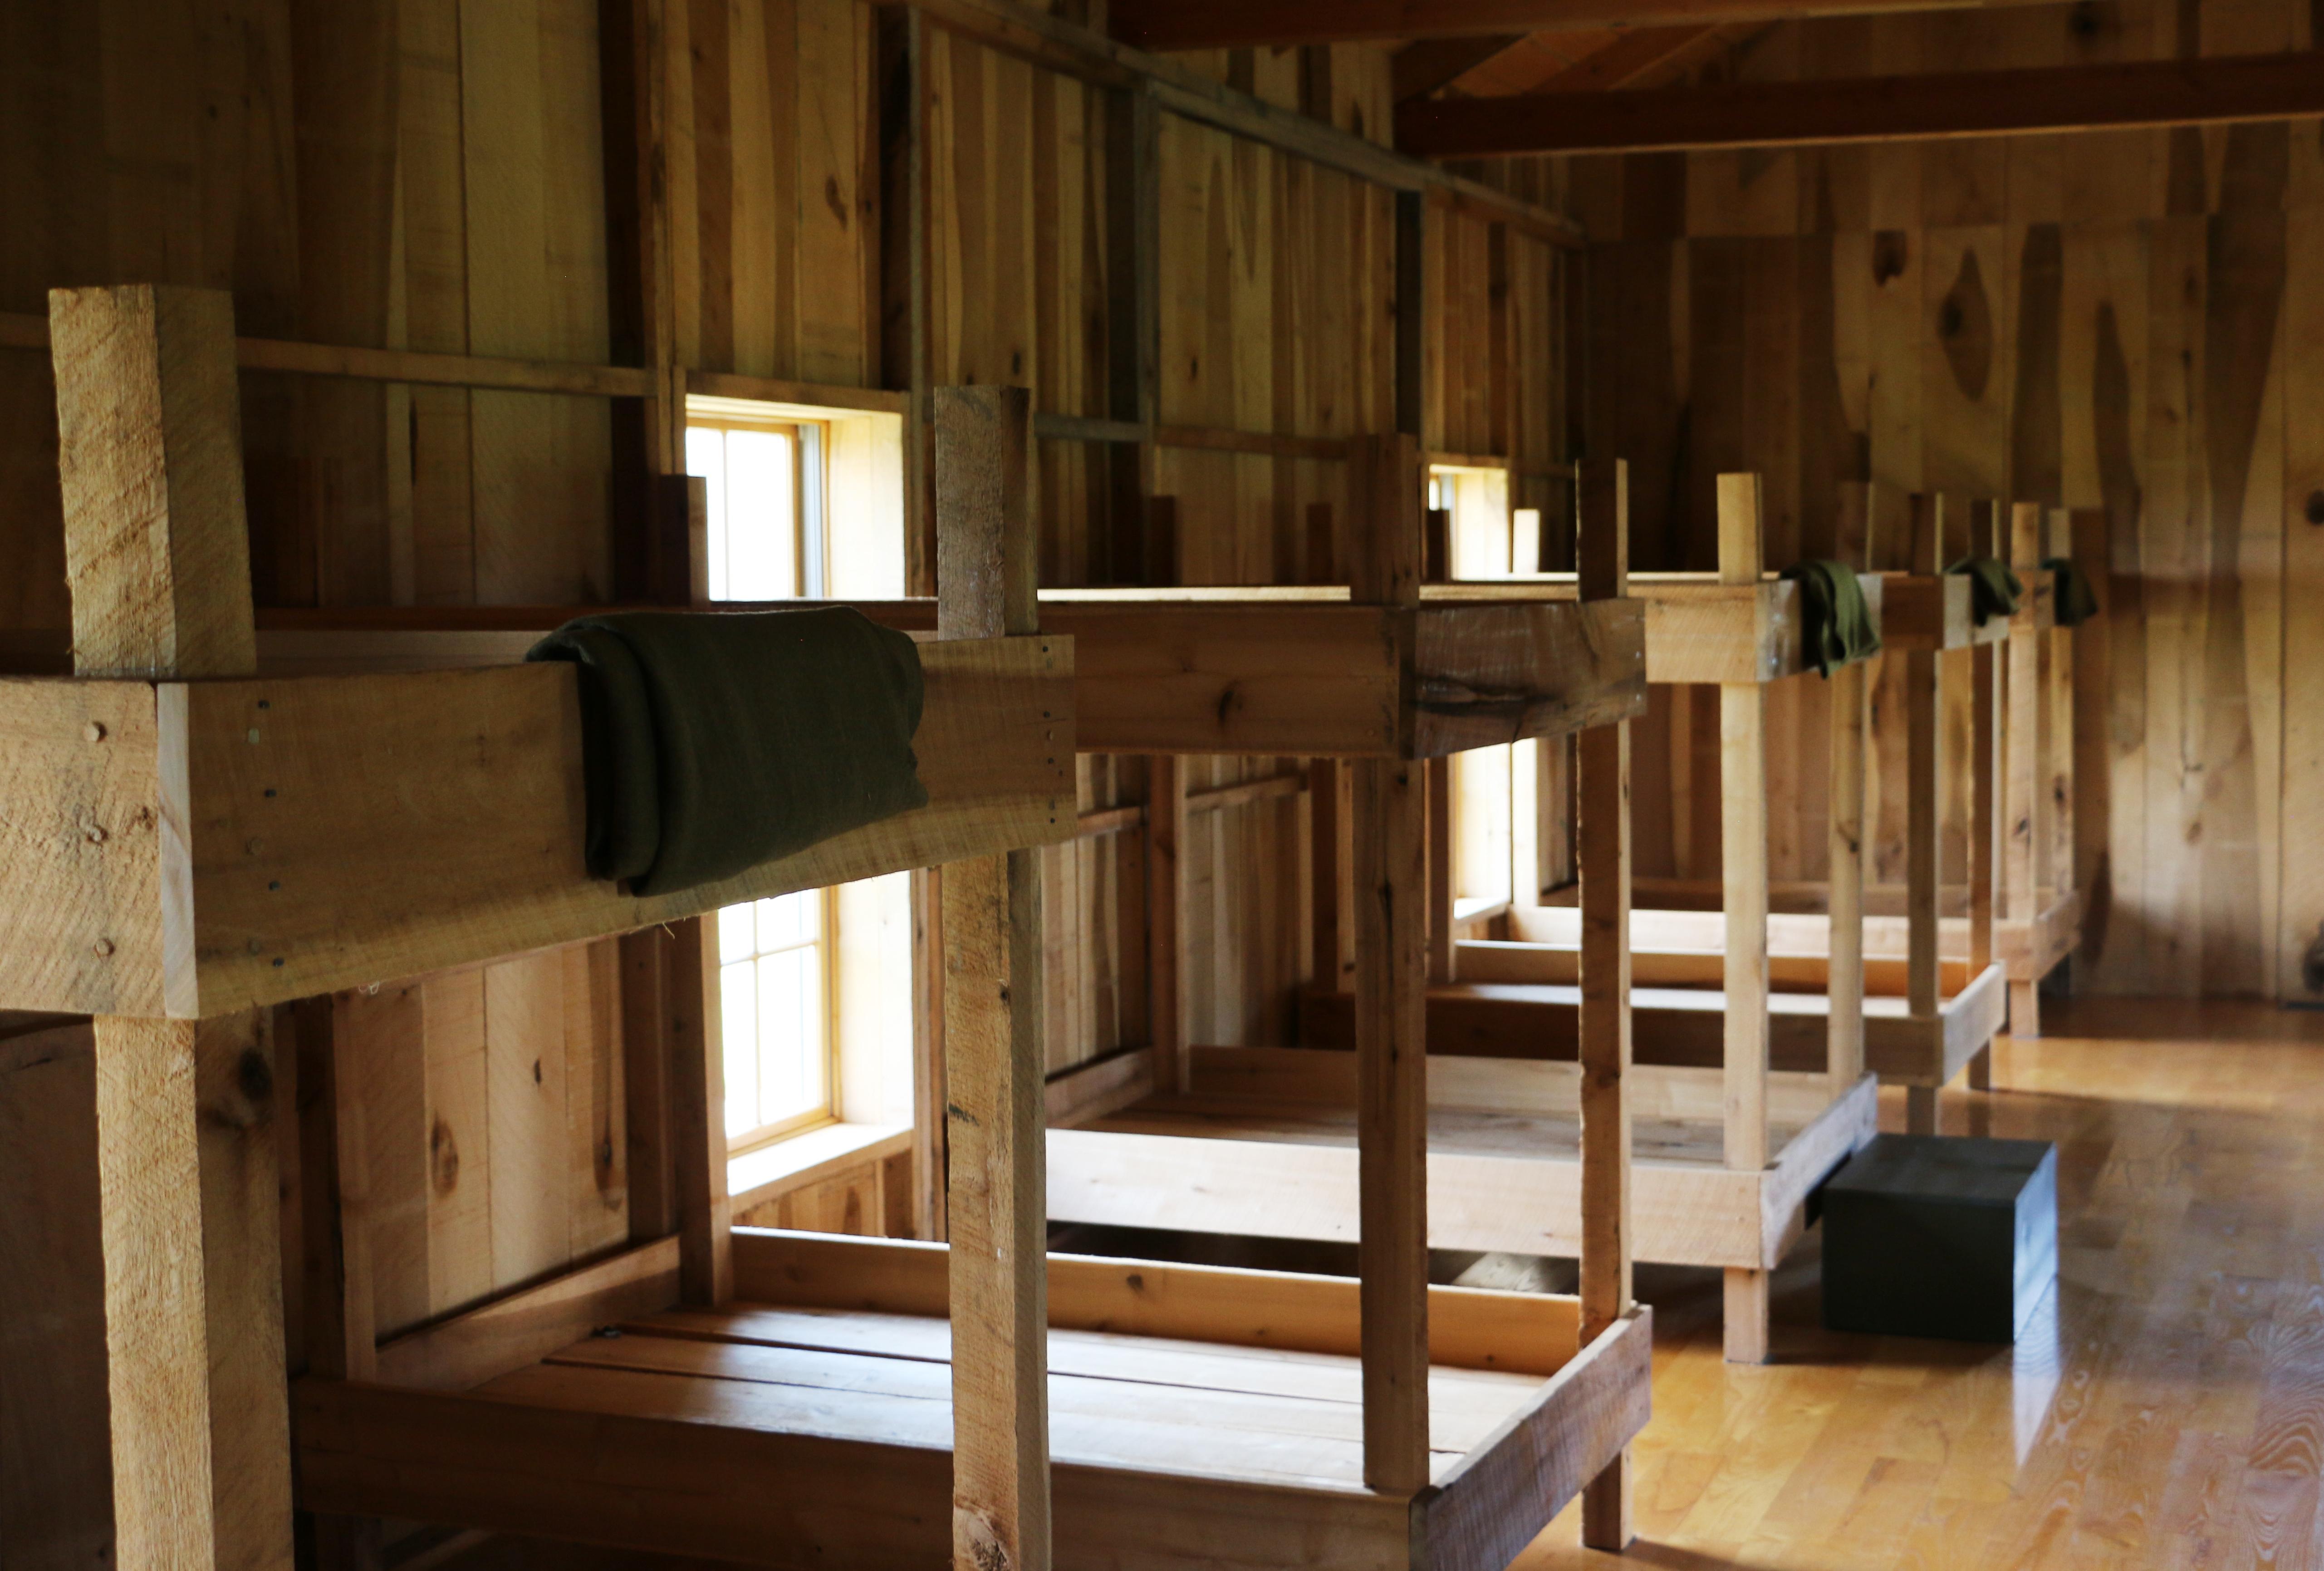 A row of rough, wooden bunk beds in the soldiers' barrack house.